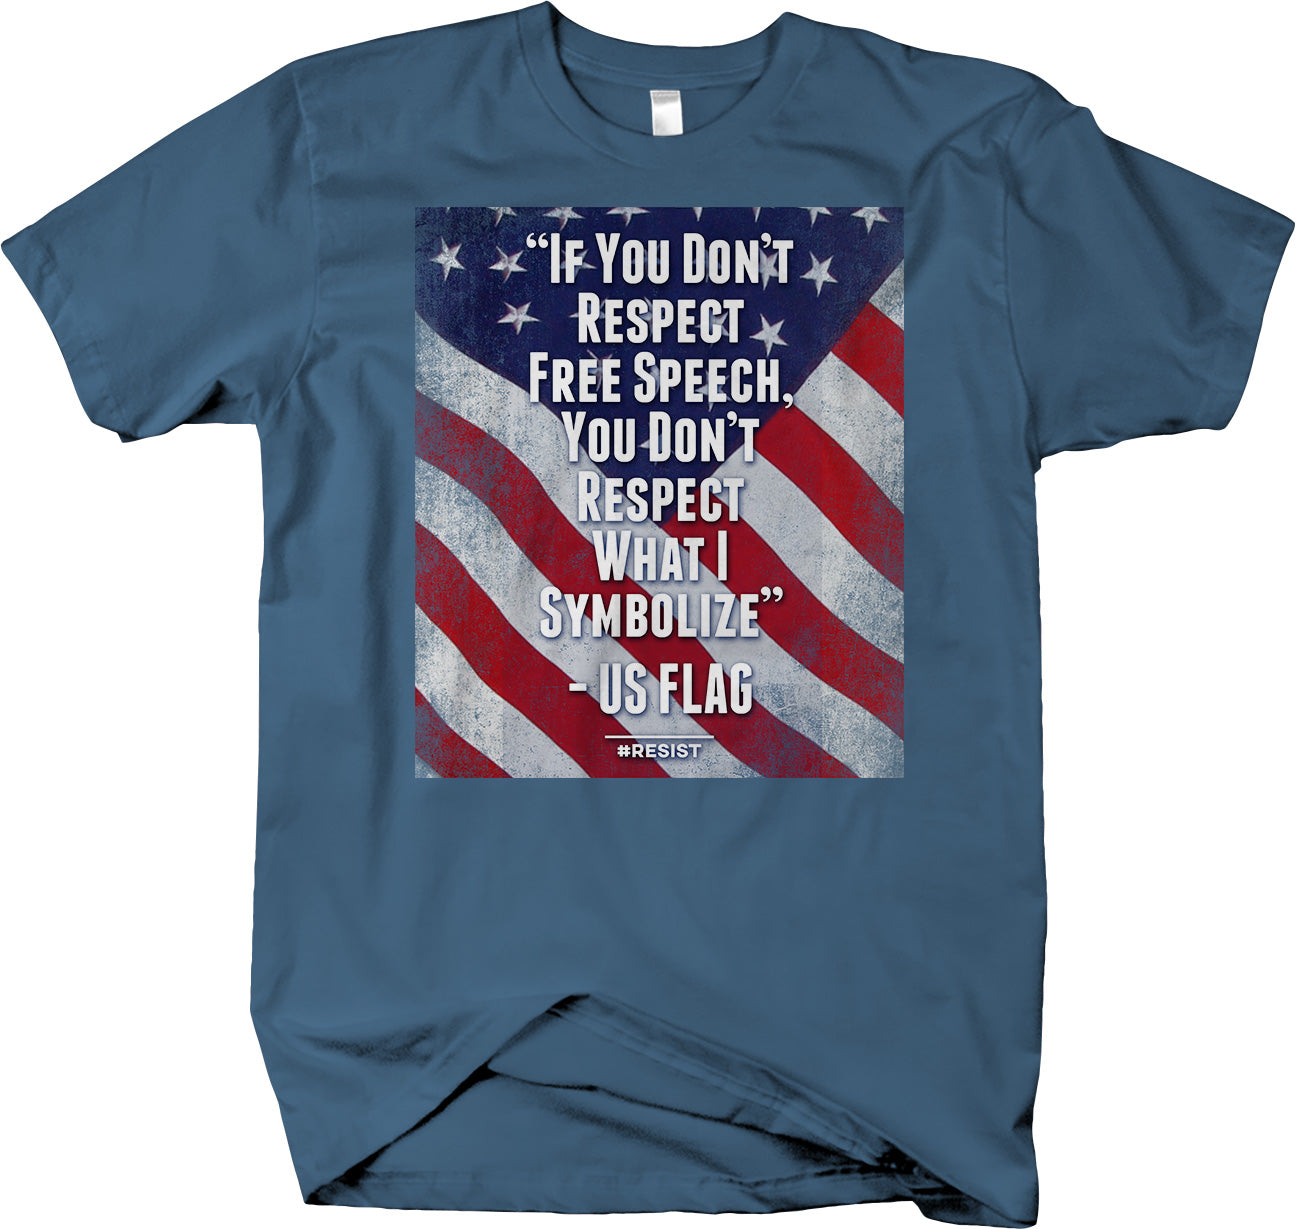 The US Flag Freedom of Speech T-shirt Political Anti-Trump NFL Ban - Larger Sizes